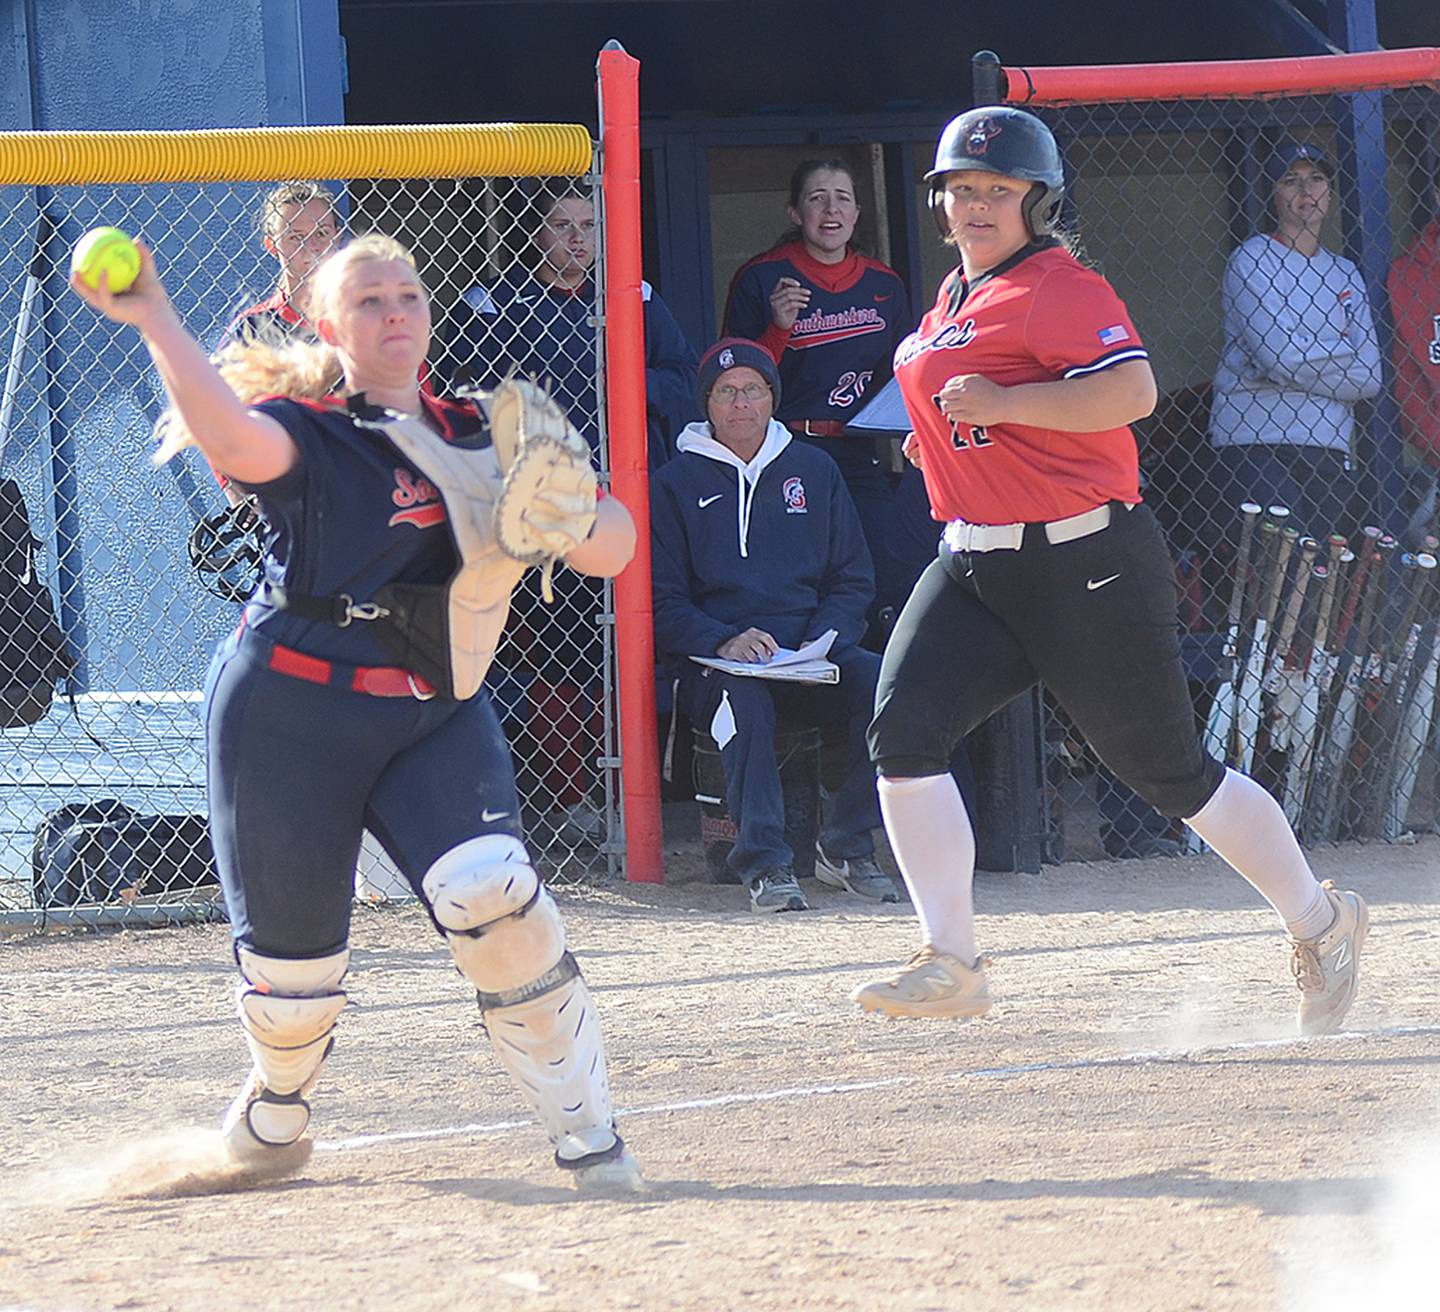 Southwestern catcher Lily McCrae throws to first base to complete a double play after receiving a throw from pitcher Erika Kruse in a bases-loaded situation Thursday against North Central Missouri.